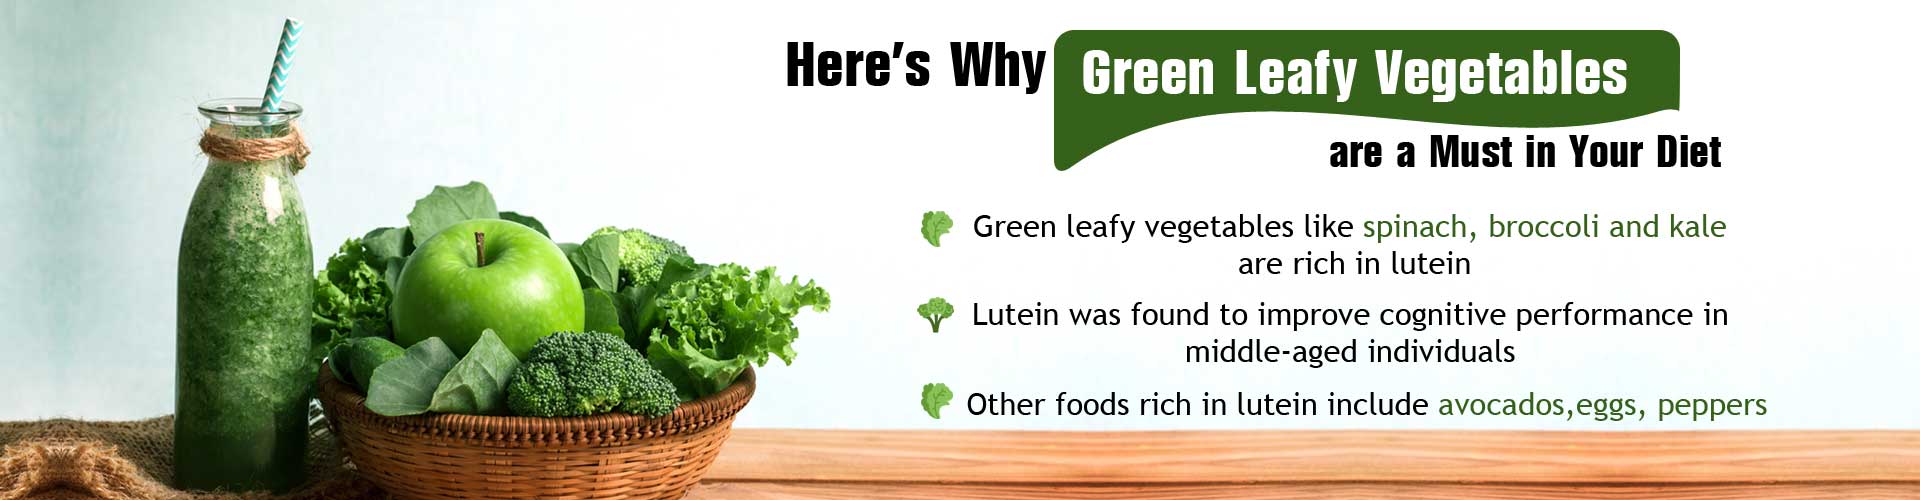 Here''s why green leafy vegetables are a must in your diet
- Green leafy vegetables like spinach, broccoli and kale are rich in lutein
- Lutein was found to improve cognitive performance in middle-aged individuals
- Other foods rich in lutein include avocados, eggs, peppers